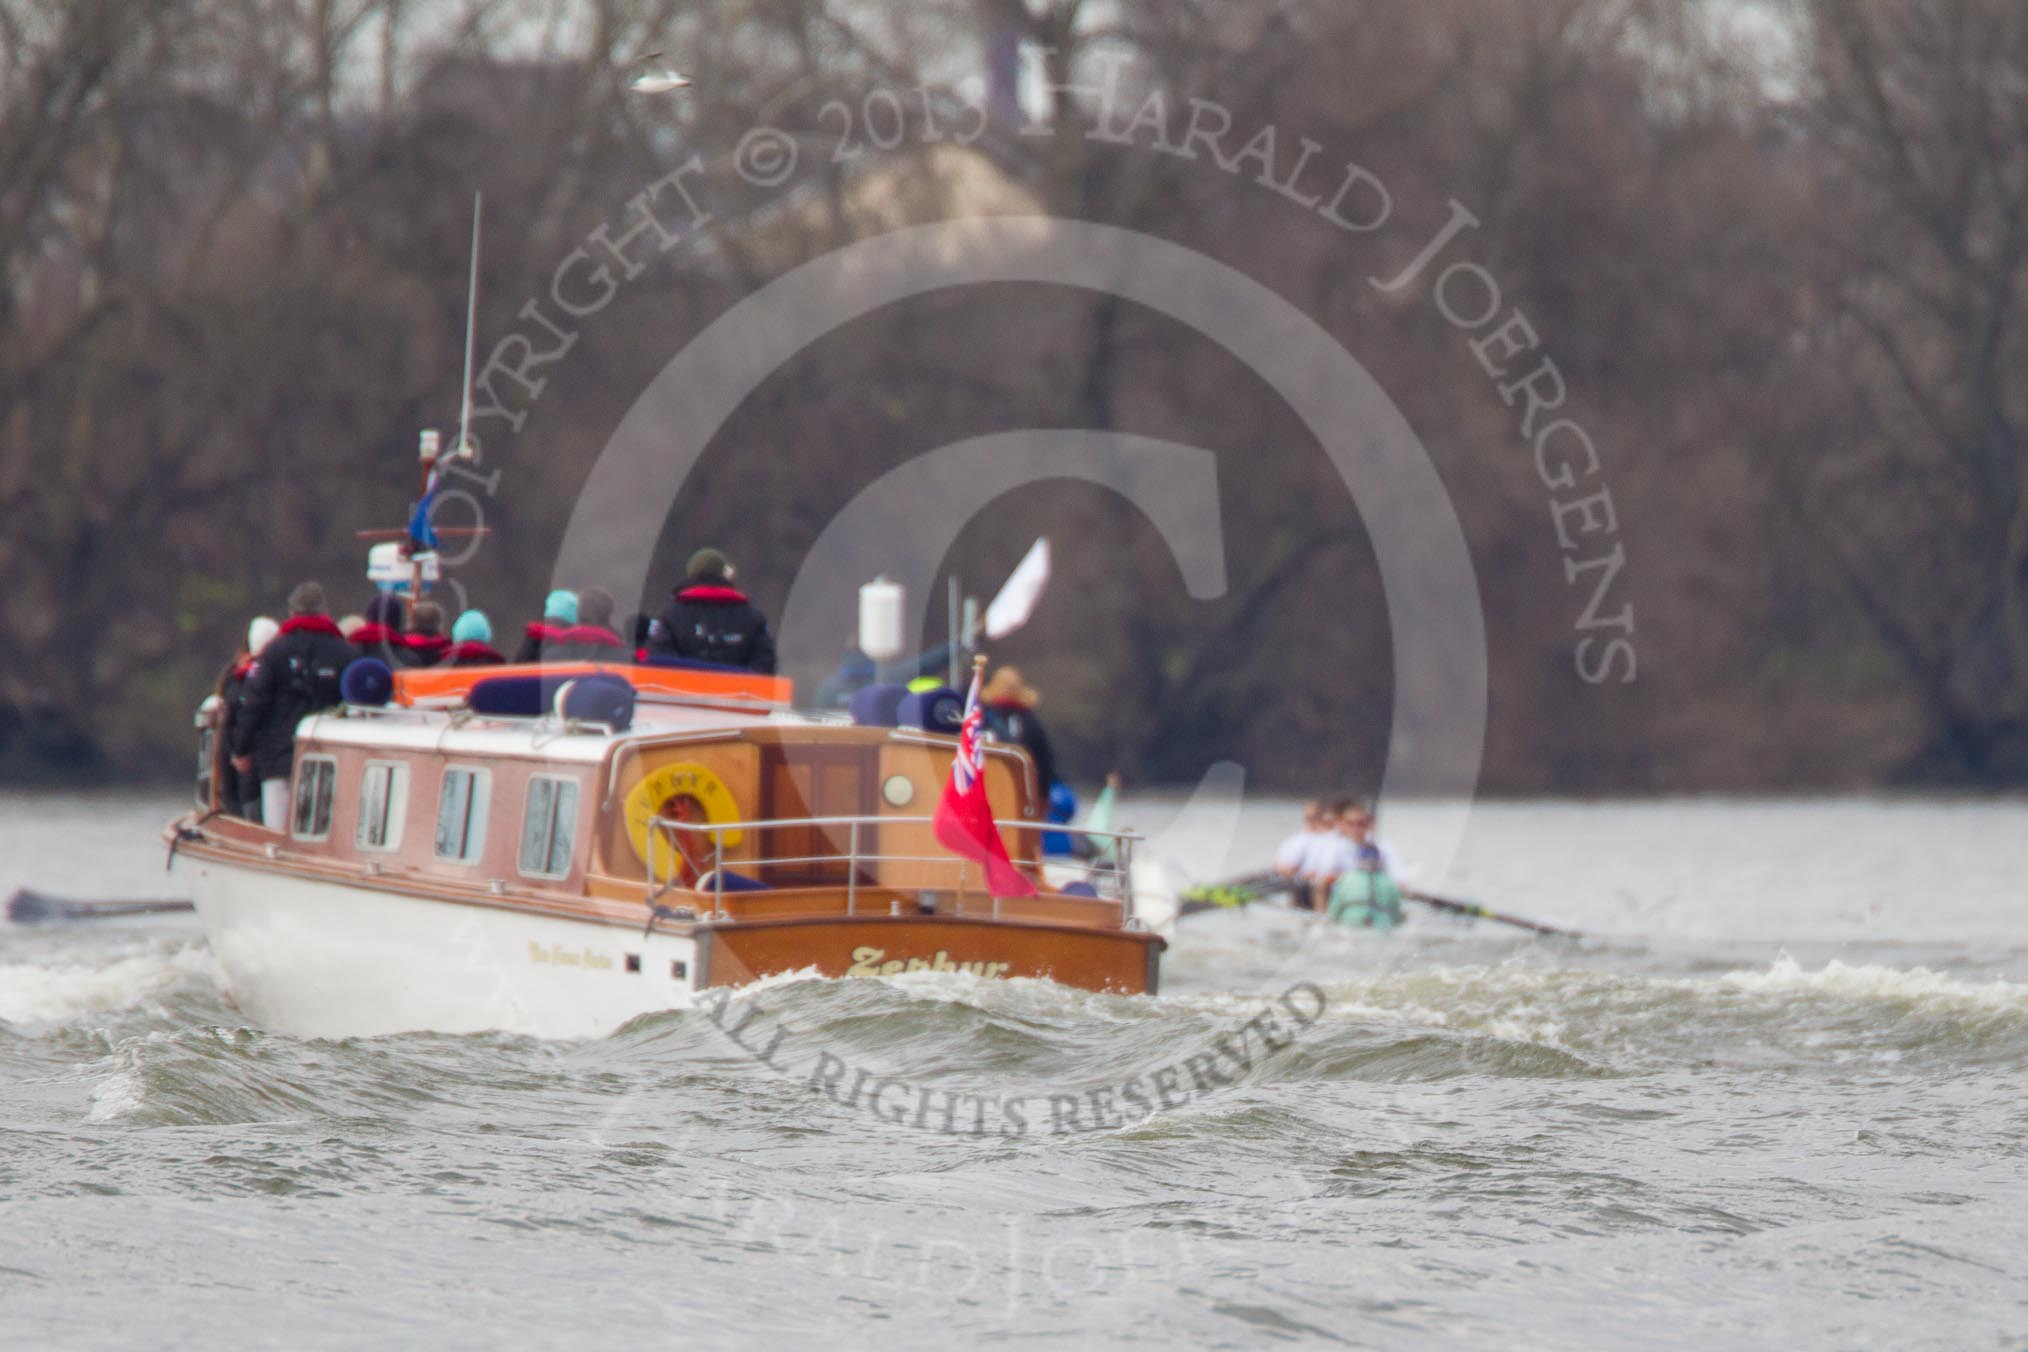 The Boat Race 2013.
Putney,
London SW15,

United Kingdom,
on 31 March 2013 at 16:33, image #319